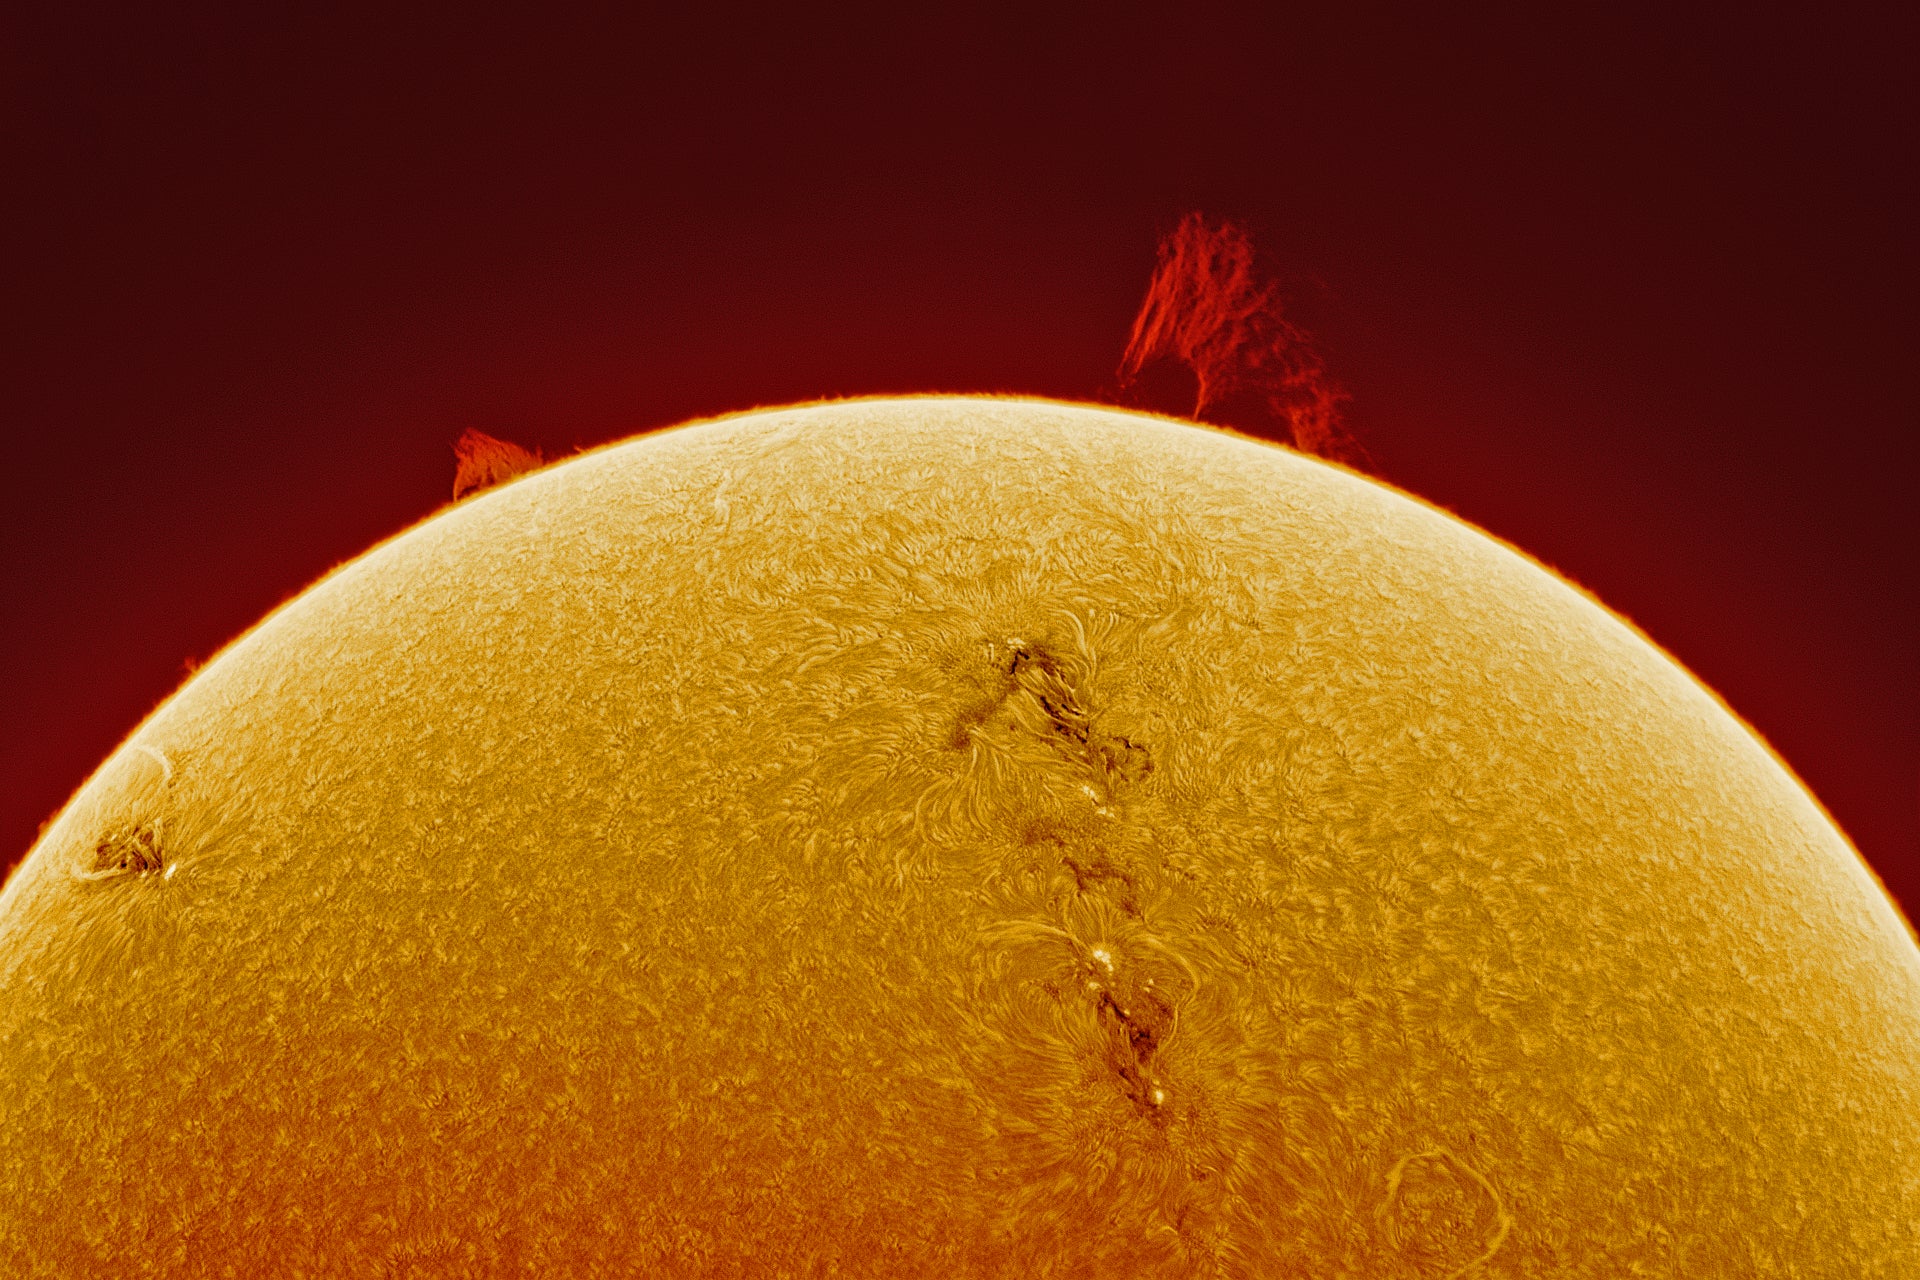 An image of the Sun showing a solar prominence — an eruption of hydrogen gas. (Image: Rafael Schmall)